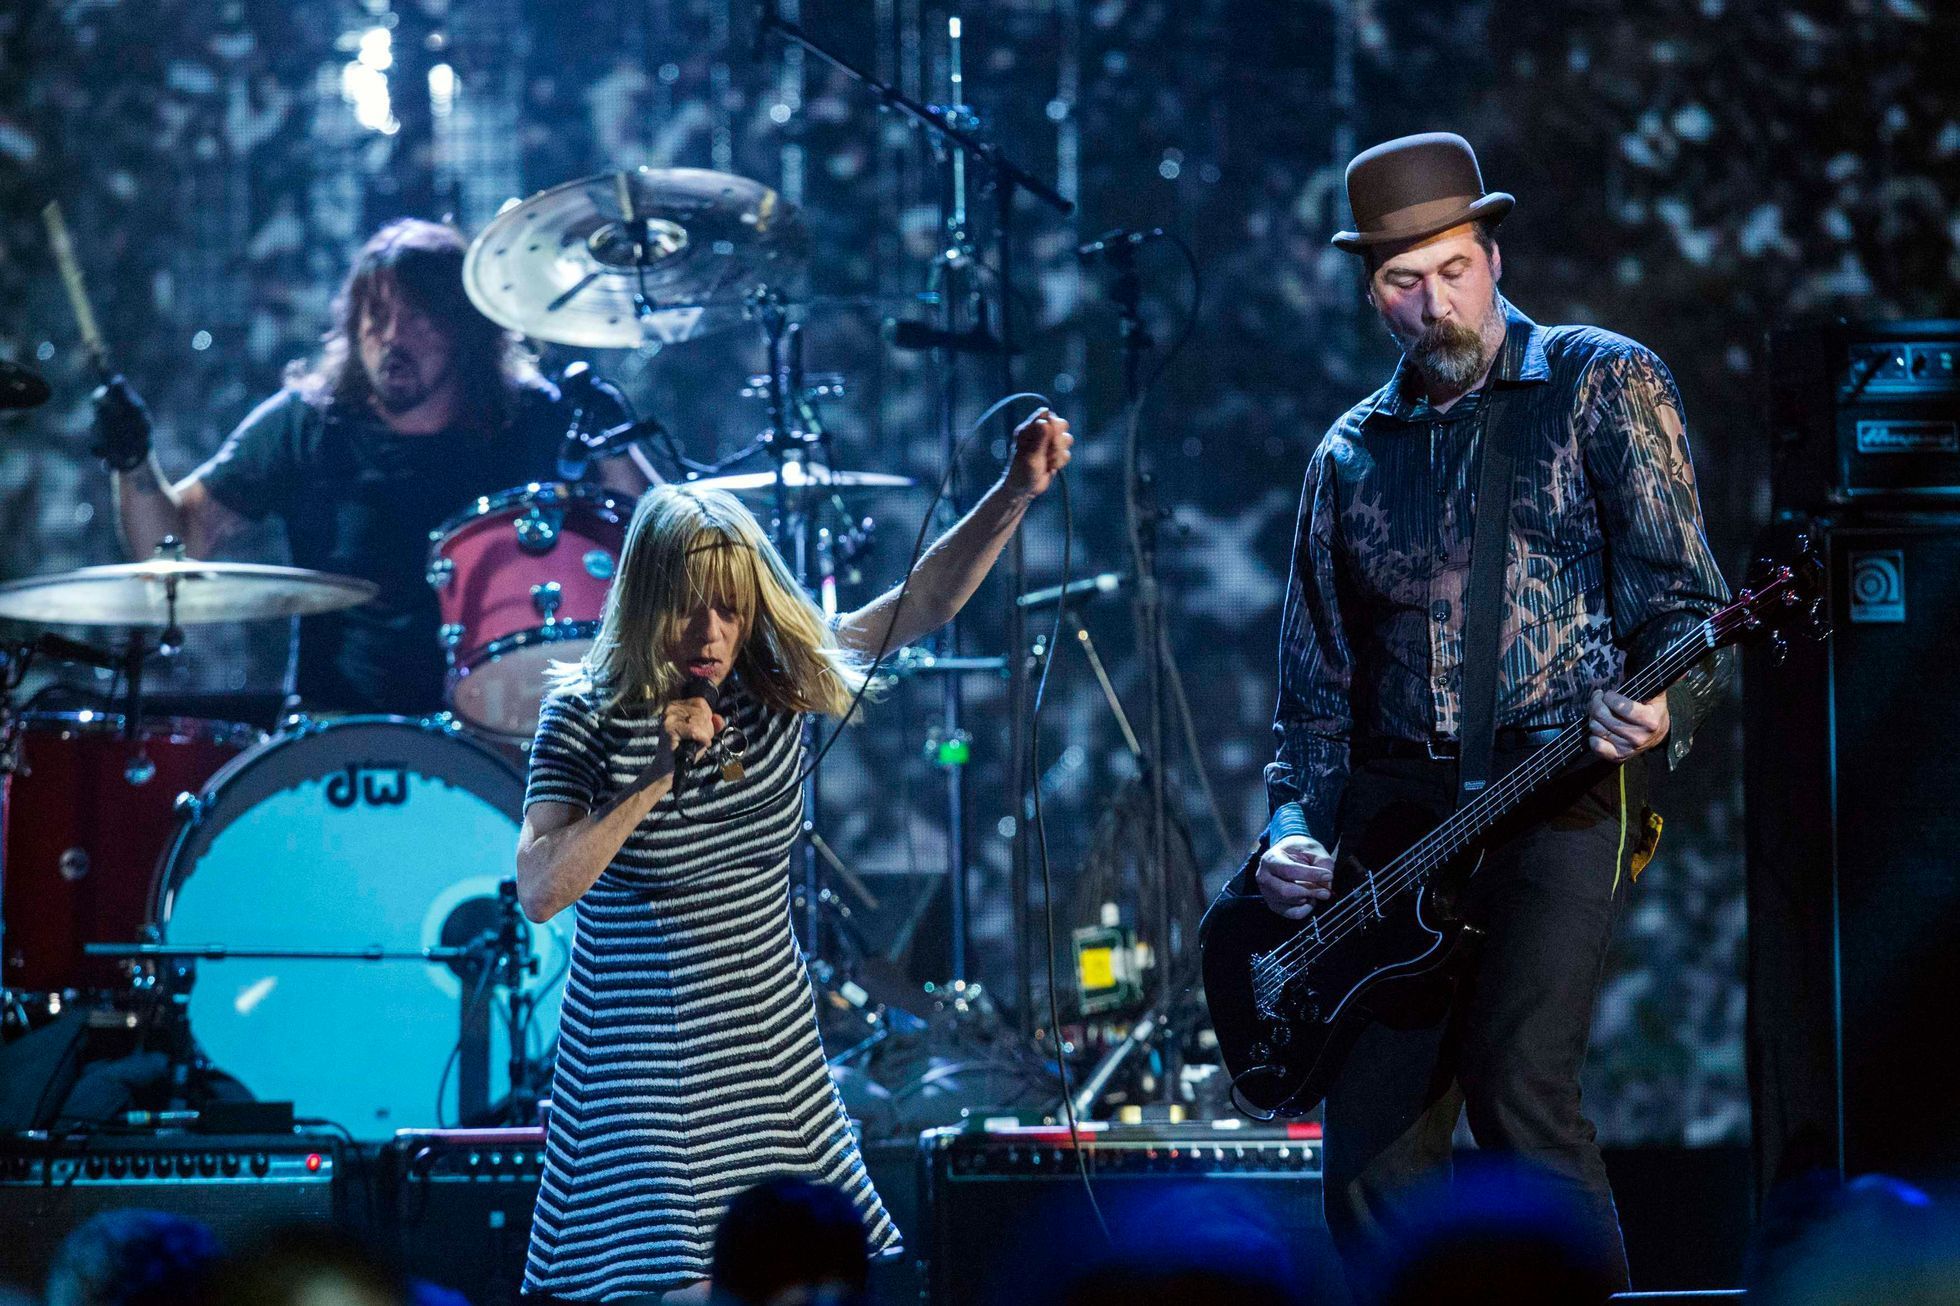 Gordon of Sonic Youth performs with Grohl and Novoselic of Nirvana after band was inducted during 29th annual Rock and Roll Hall of Fame Induction Ceremony in Brooklyn, New York